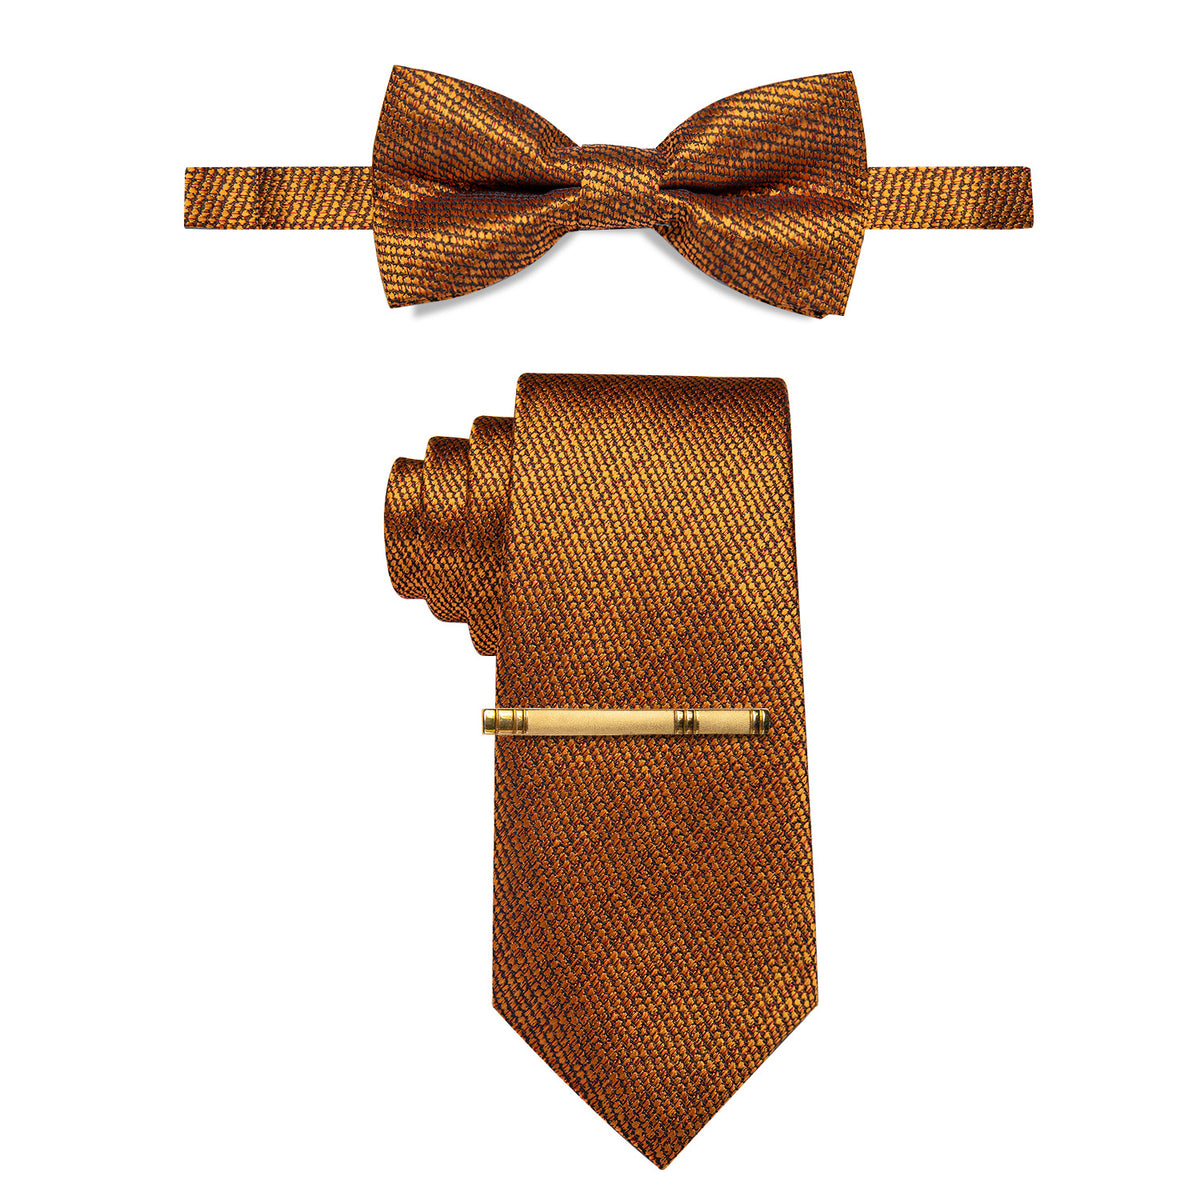 gold bow tie